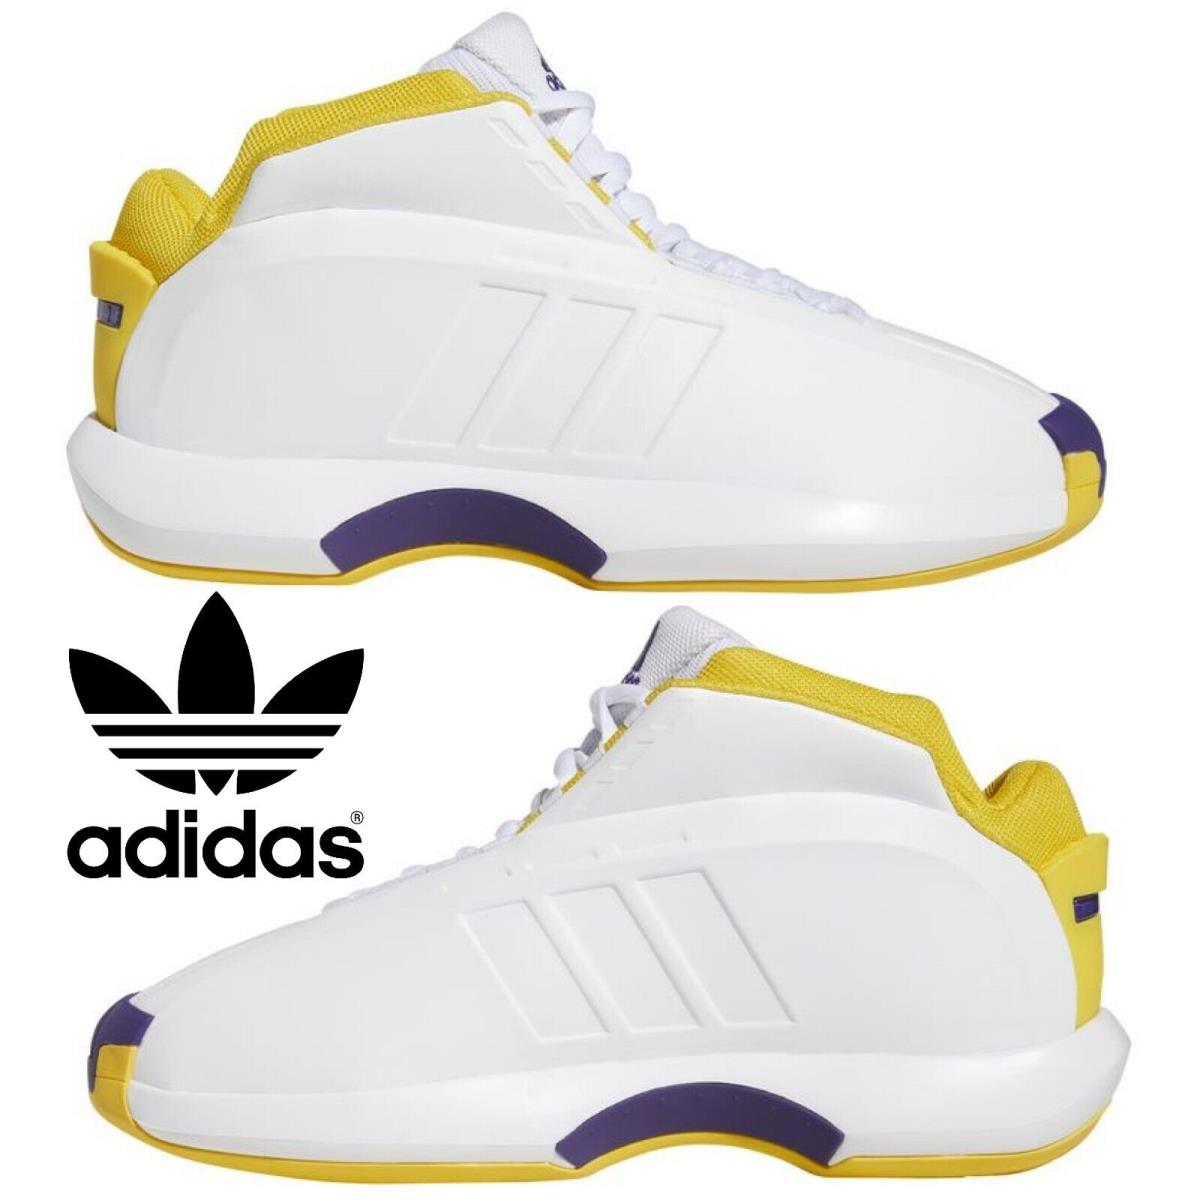 Adidas Crazy 1 Men`s Sneakers Basketball Shoes Running Gym Court Sport White